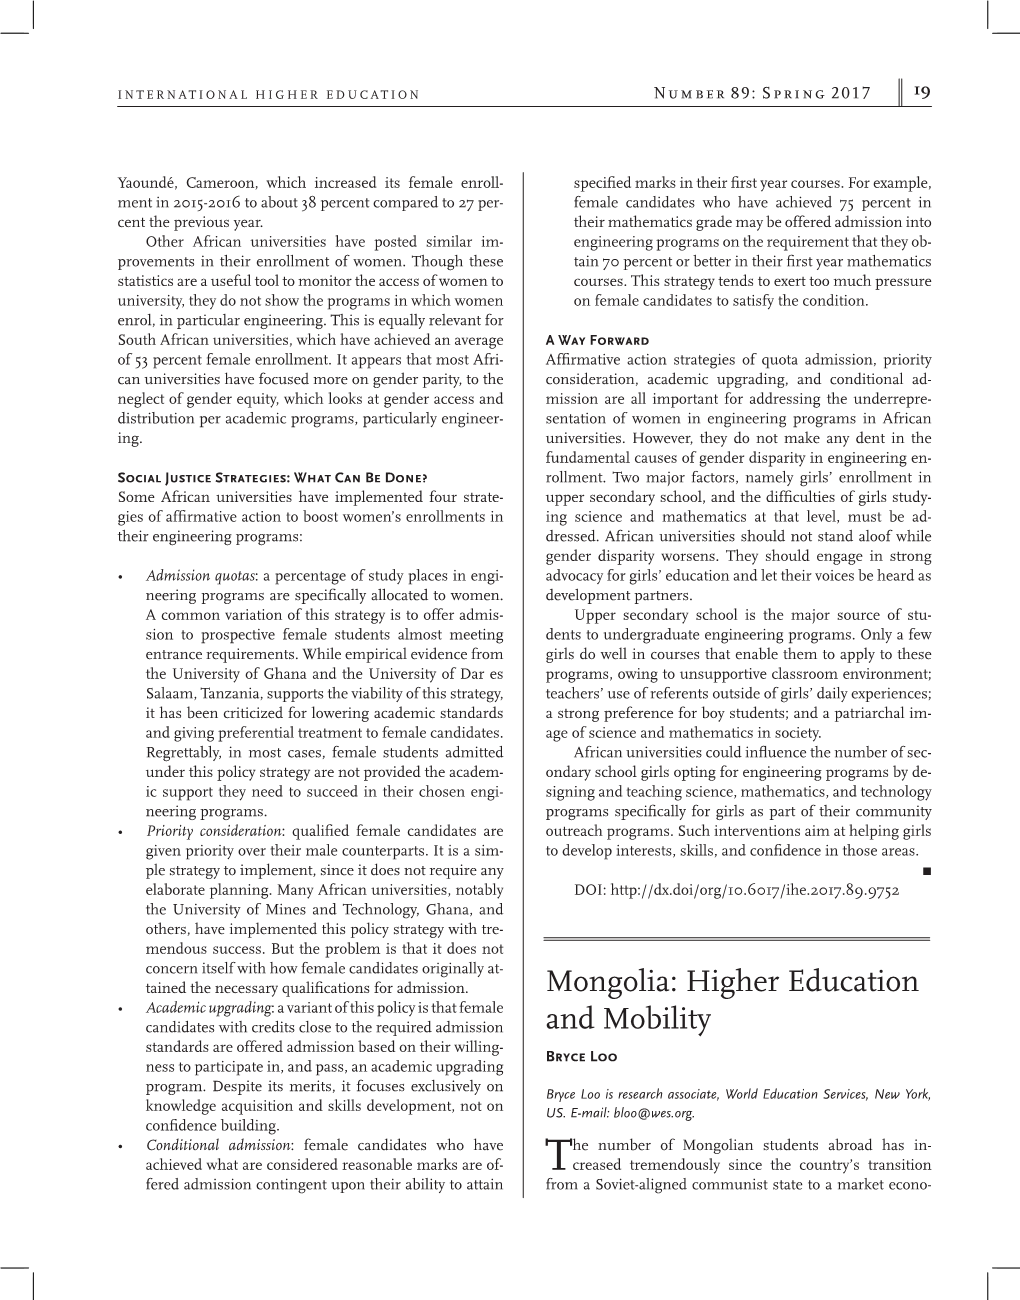 Mongolia: Higher Education and Mobility